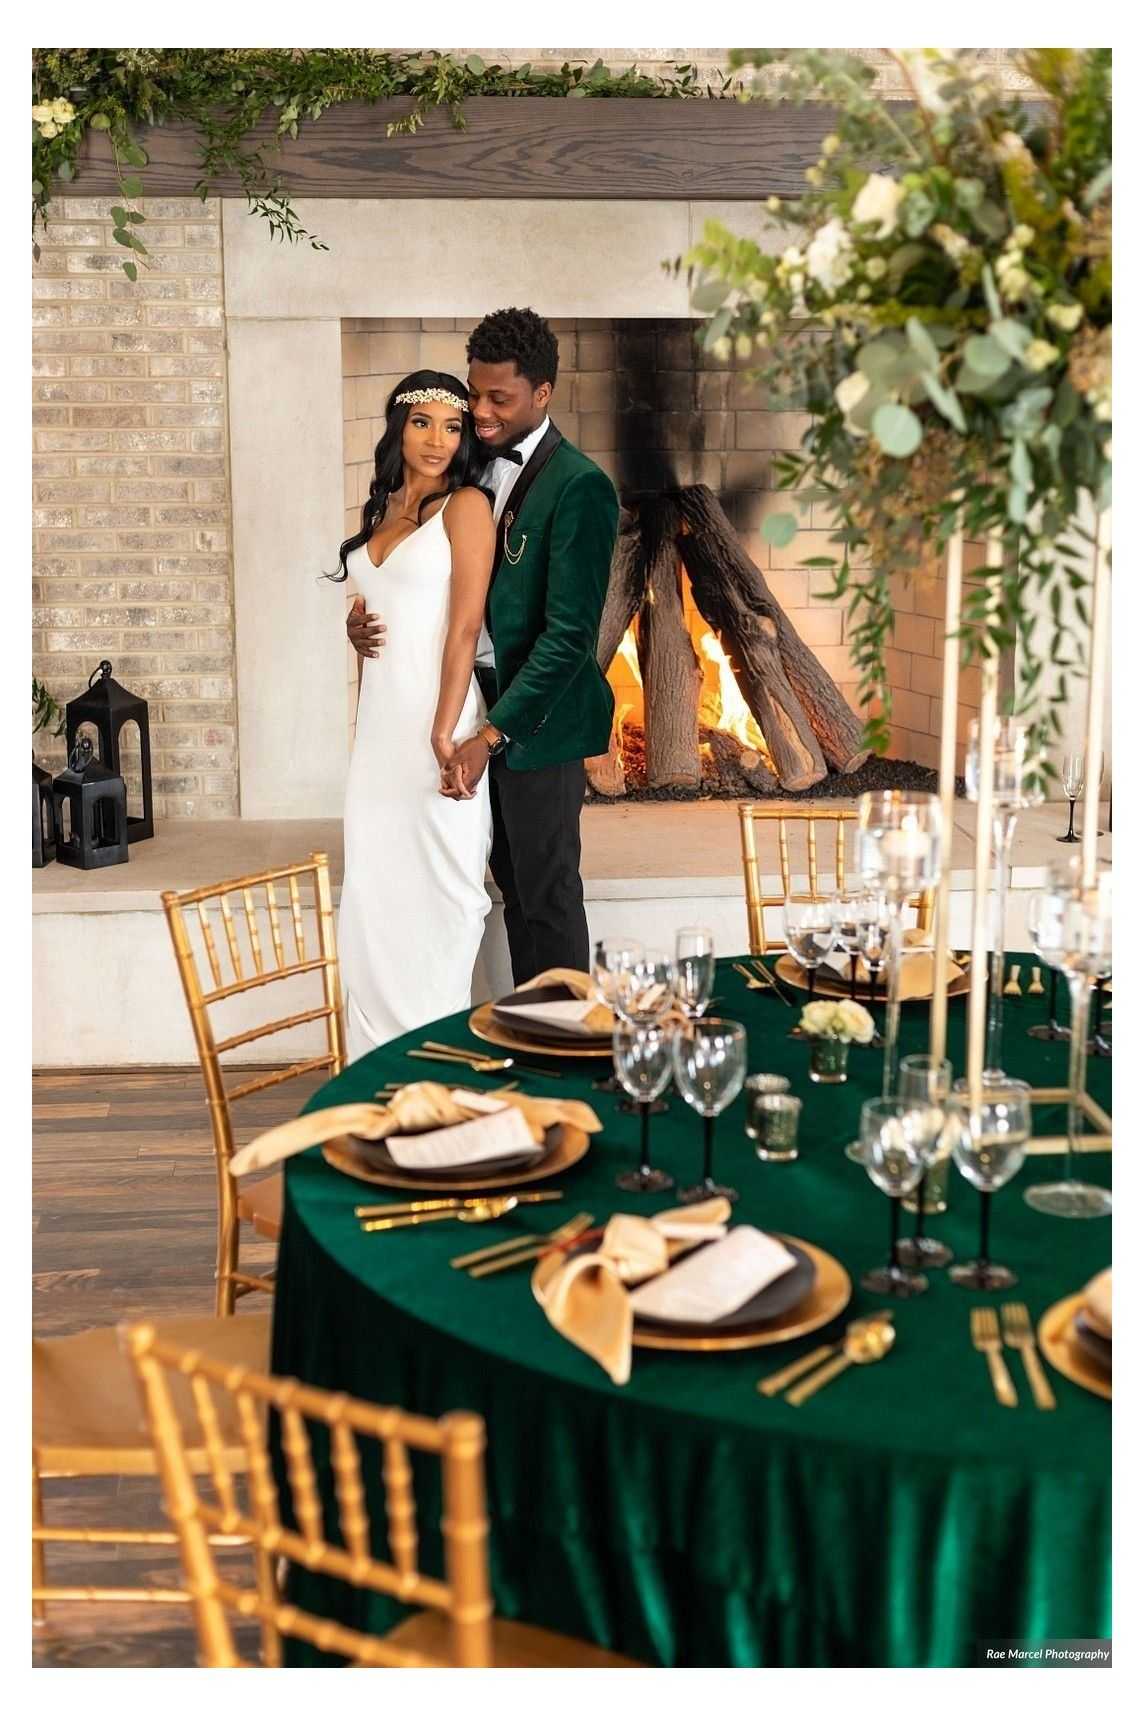 ️ Elegant Emerald Green and Gold Wedding: A Timeless Trend